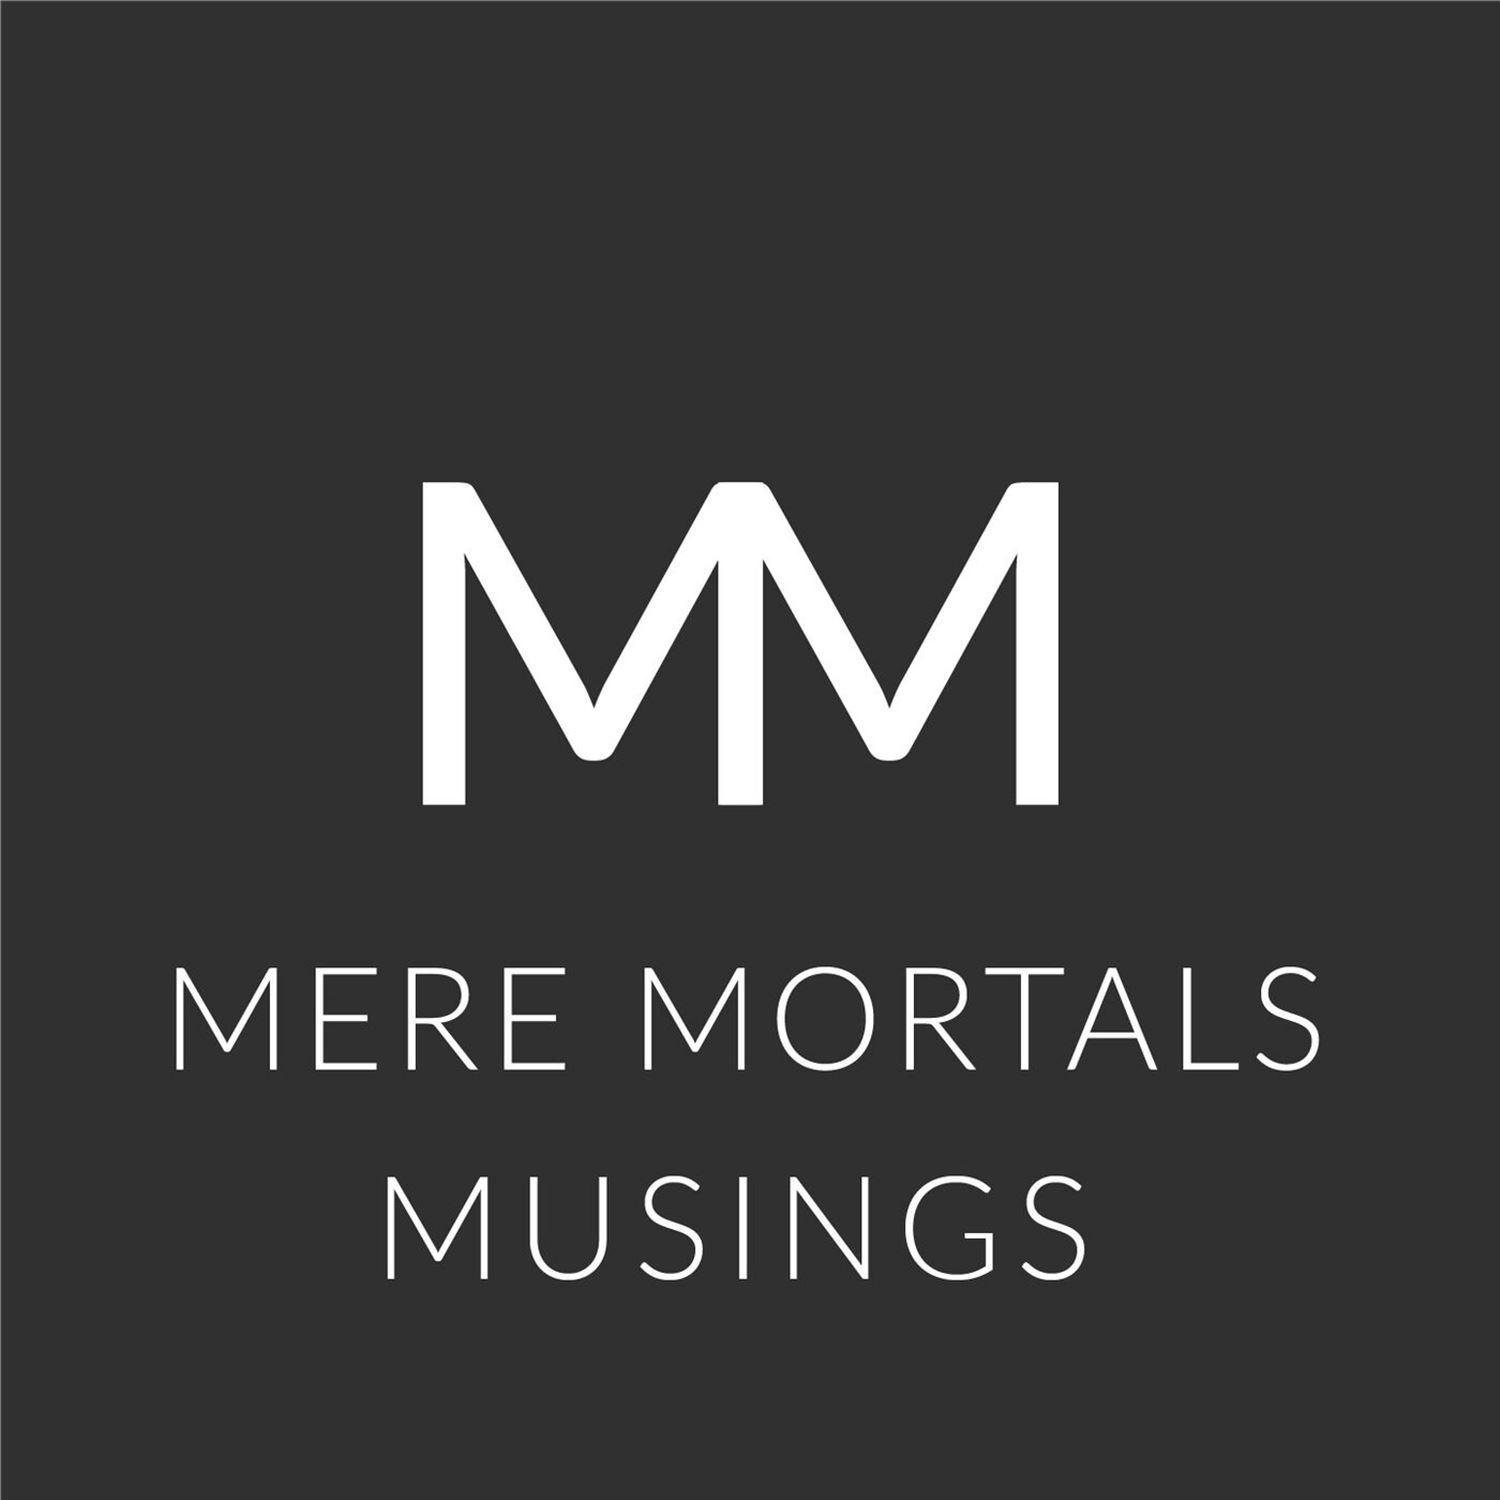 What Are The Best Karaoke Songs? (Mere Mortals Episode #78 - Musings)